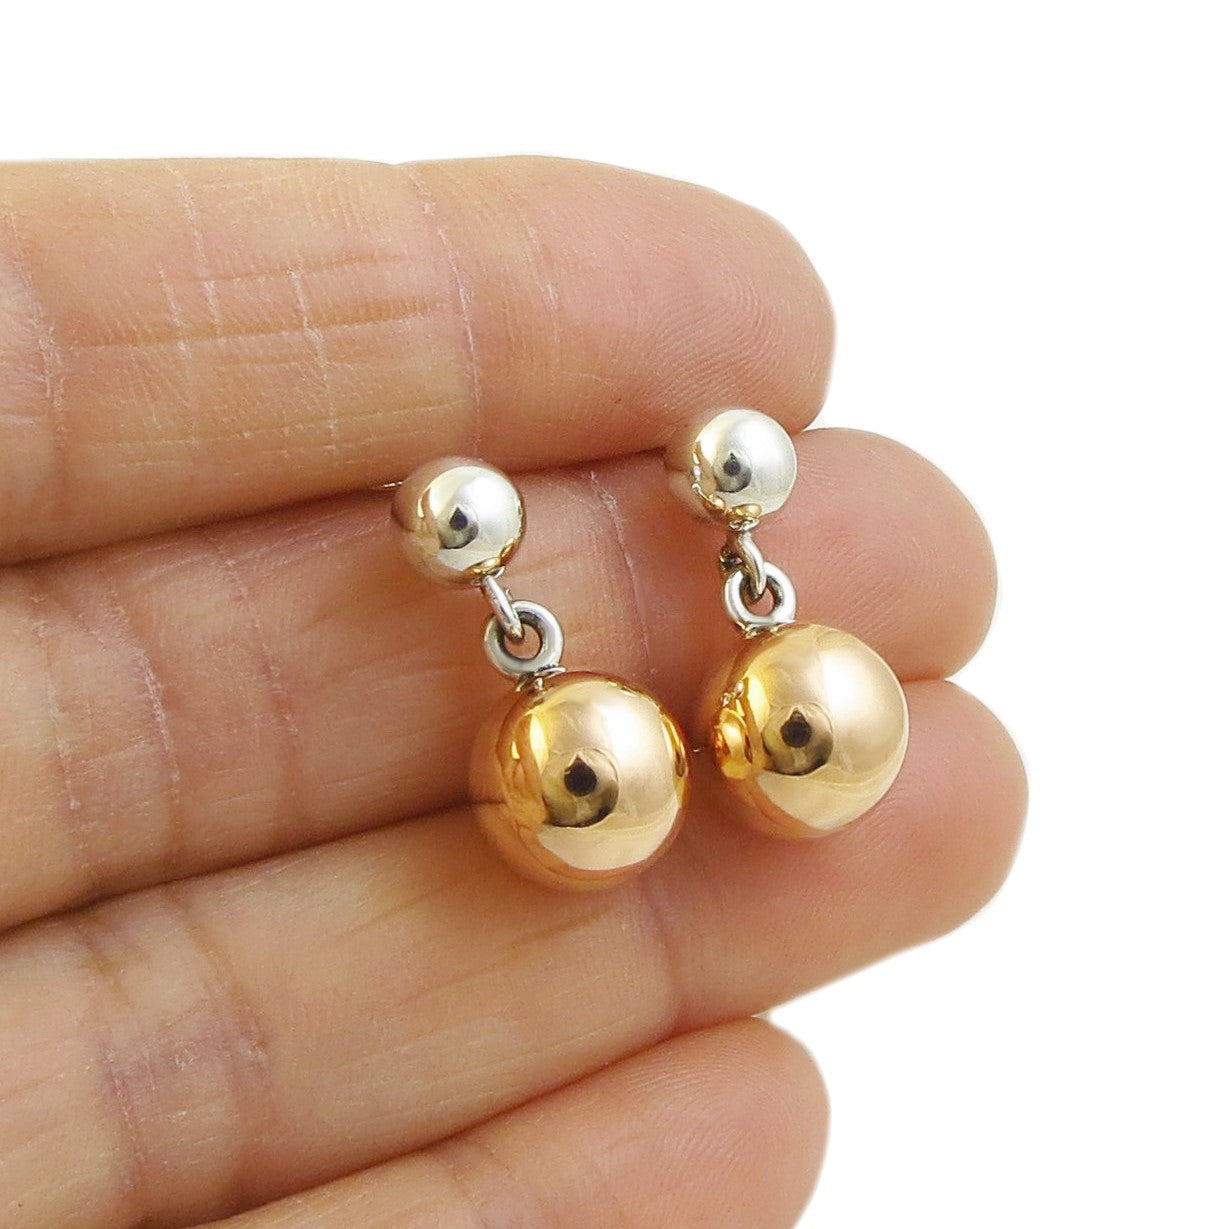 Earrings Sterling Silver Ball Stud 10mm 8mm 6mm 4mm 3mm 2mm Silver Bead  Studs Hollow 925 Bridesmaid Big Tiny Minimalistic - Etsy